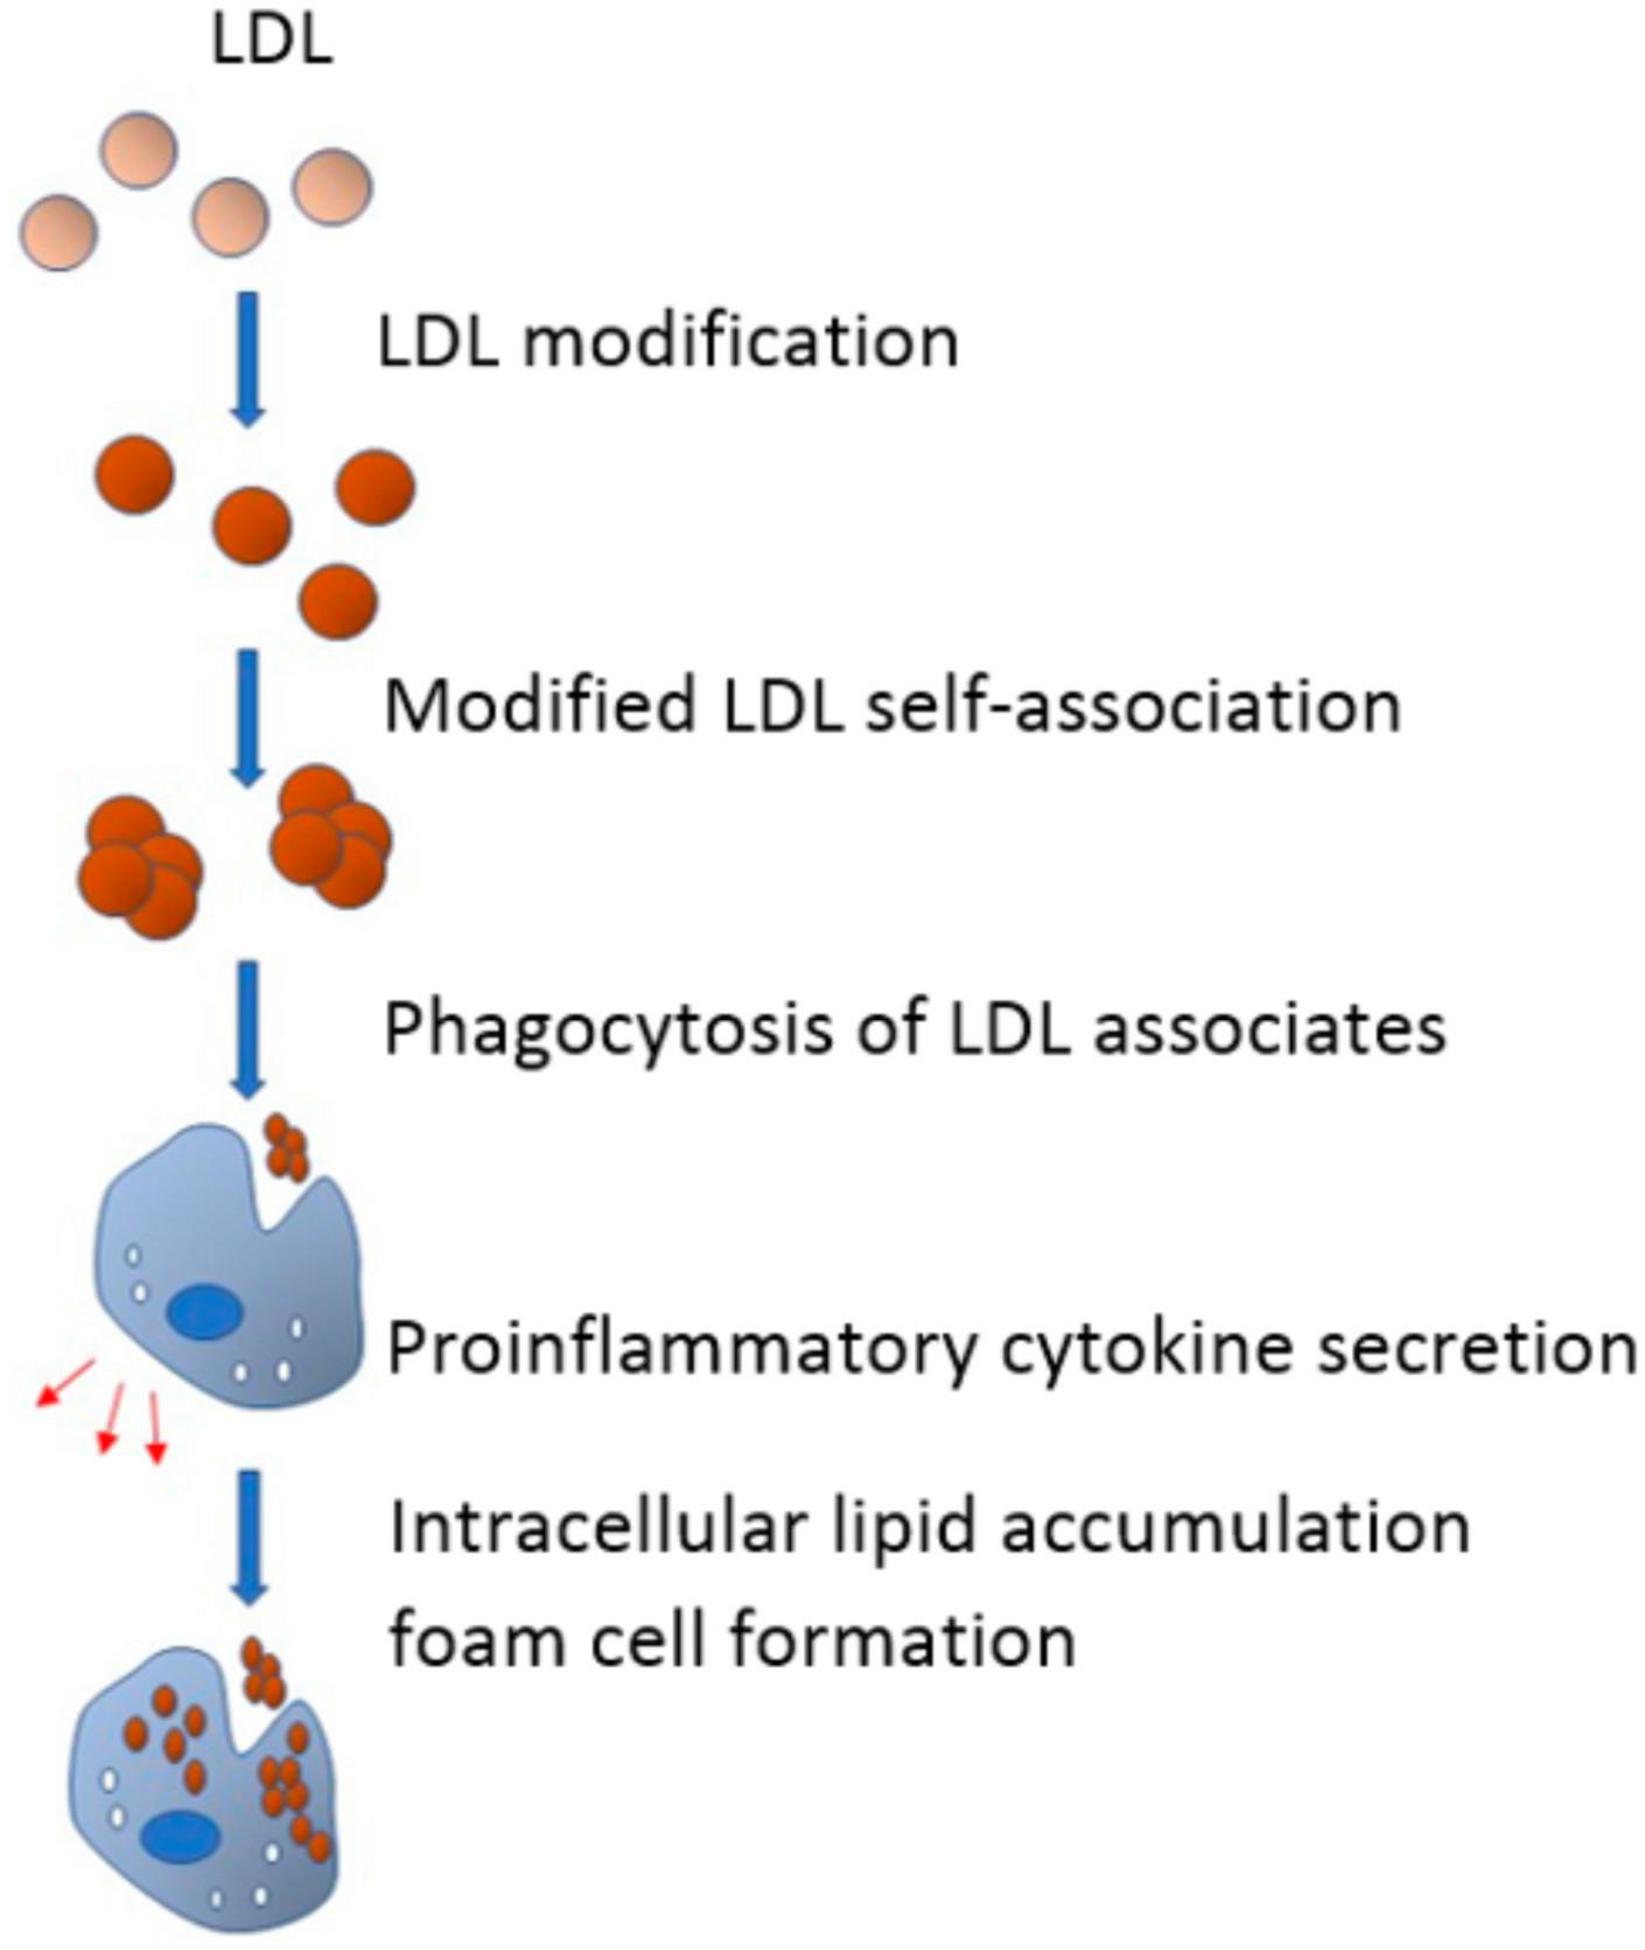 Glycation of LDL: AGEs, impact on lipoprotein function, and involvement in atherosclerosis